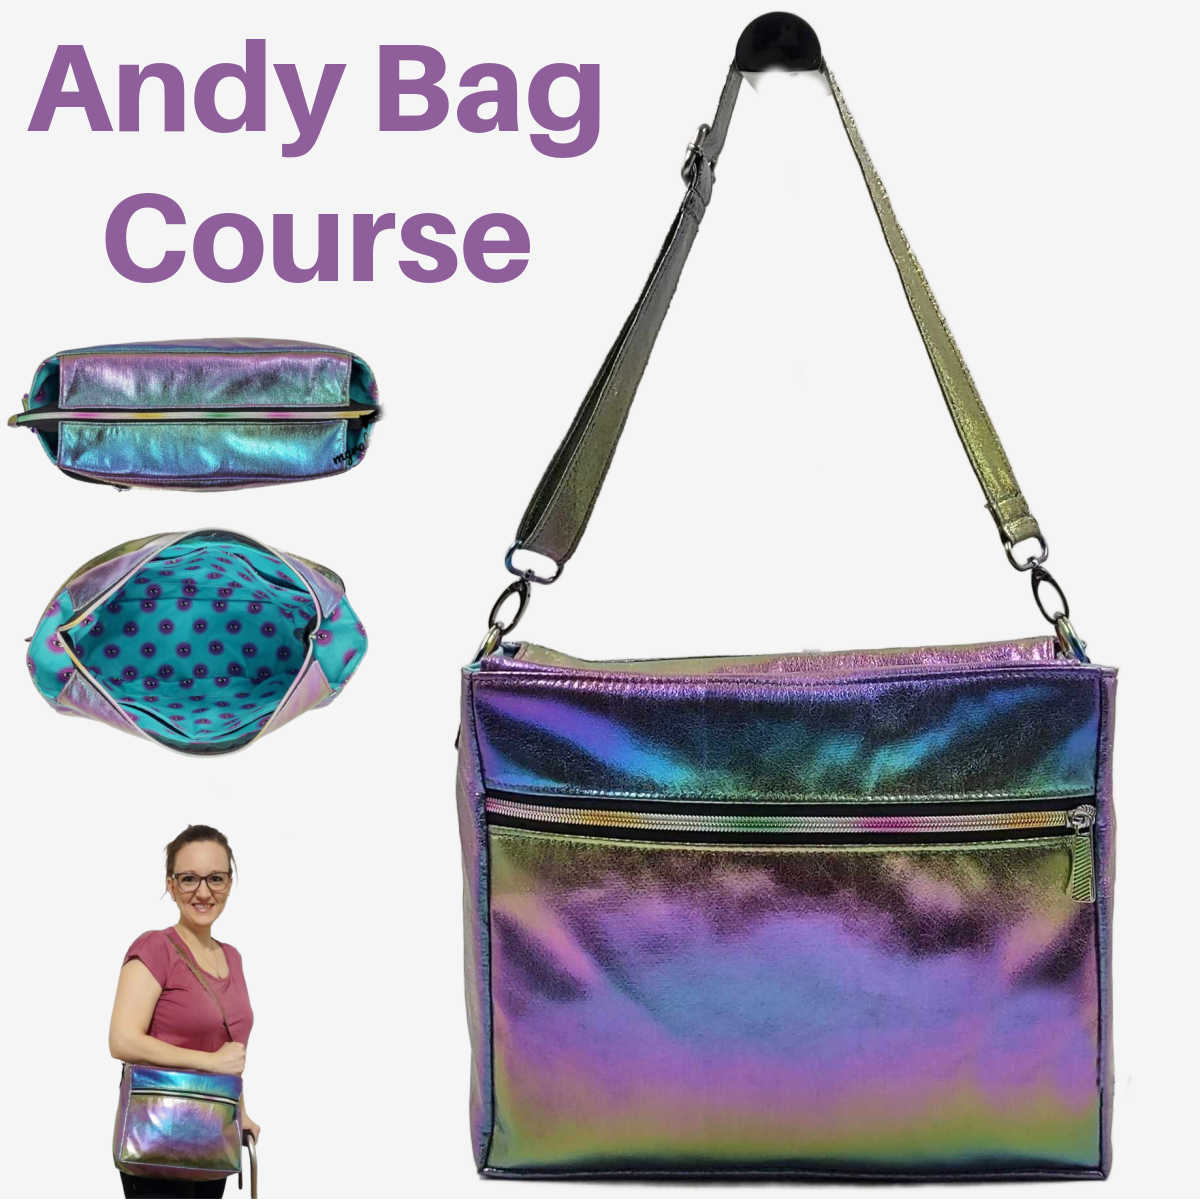 Andy Bag Course